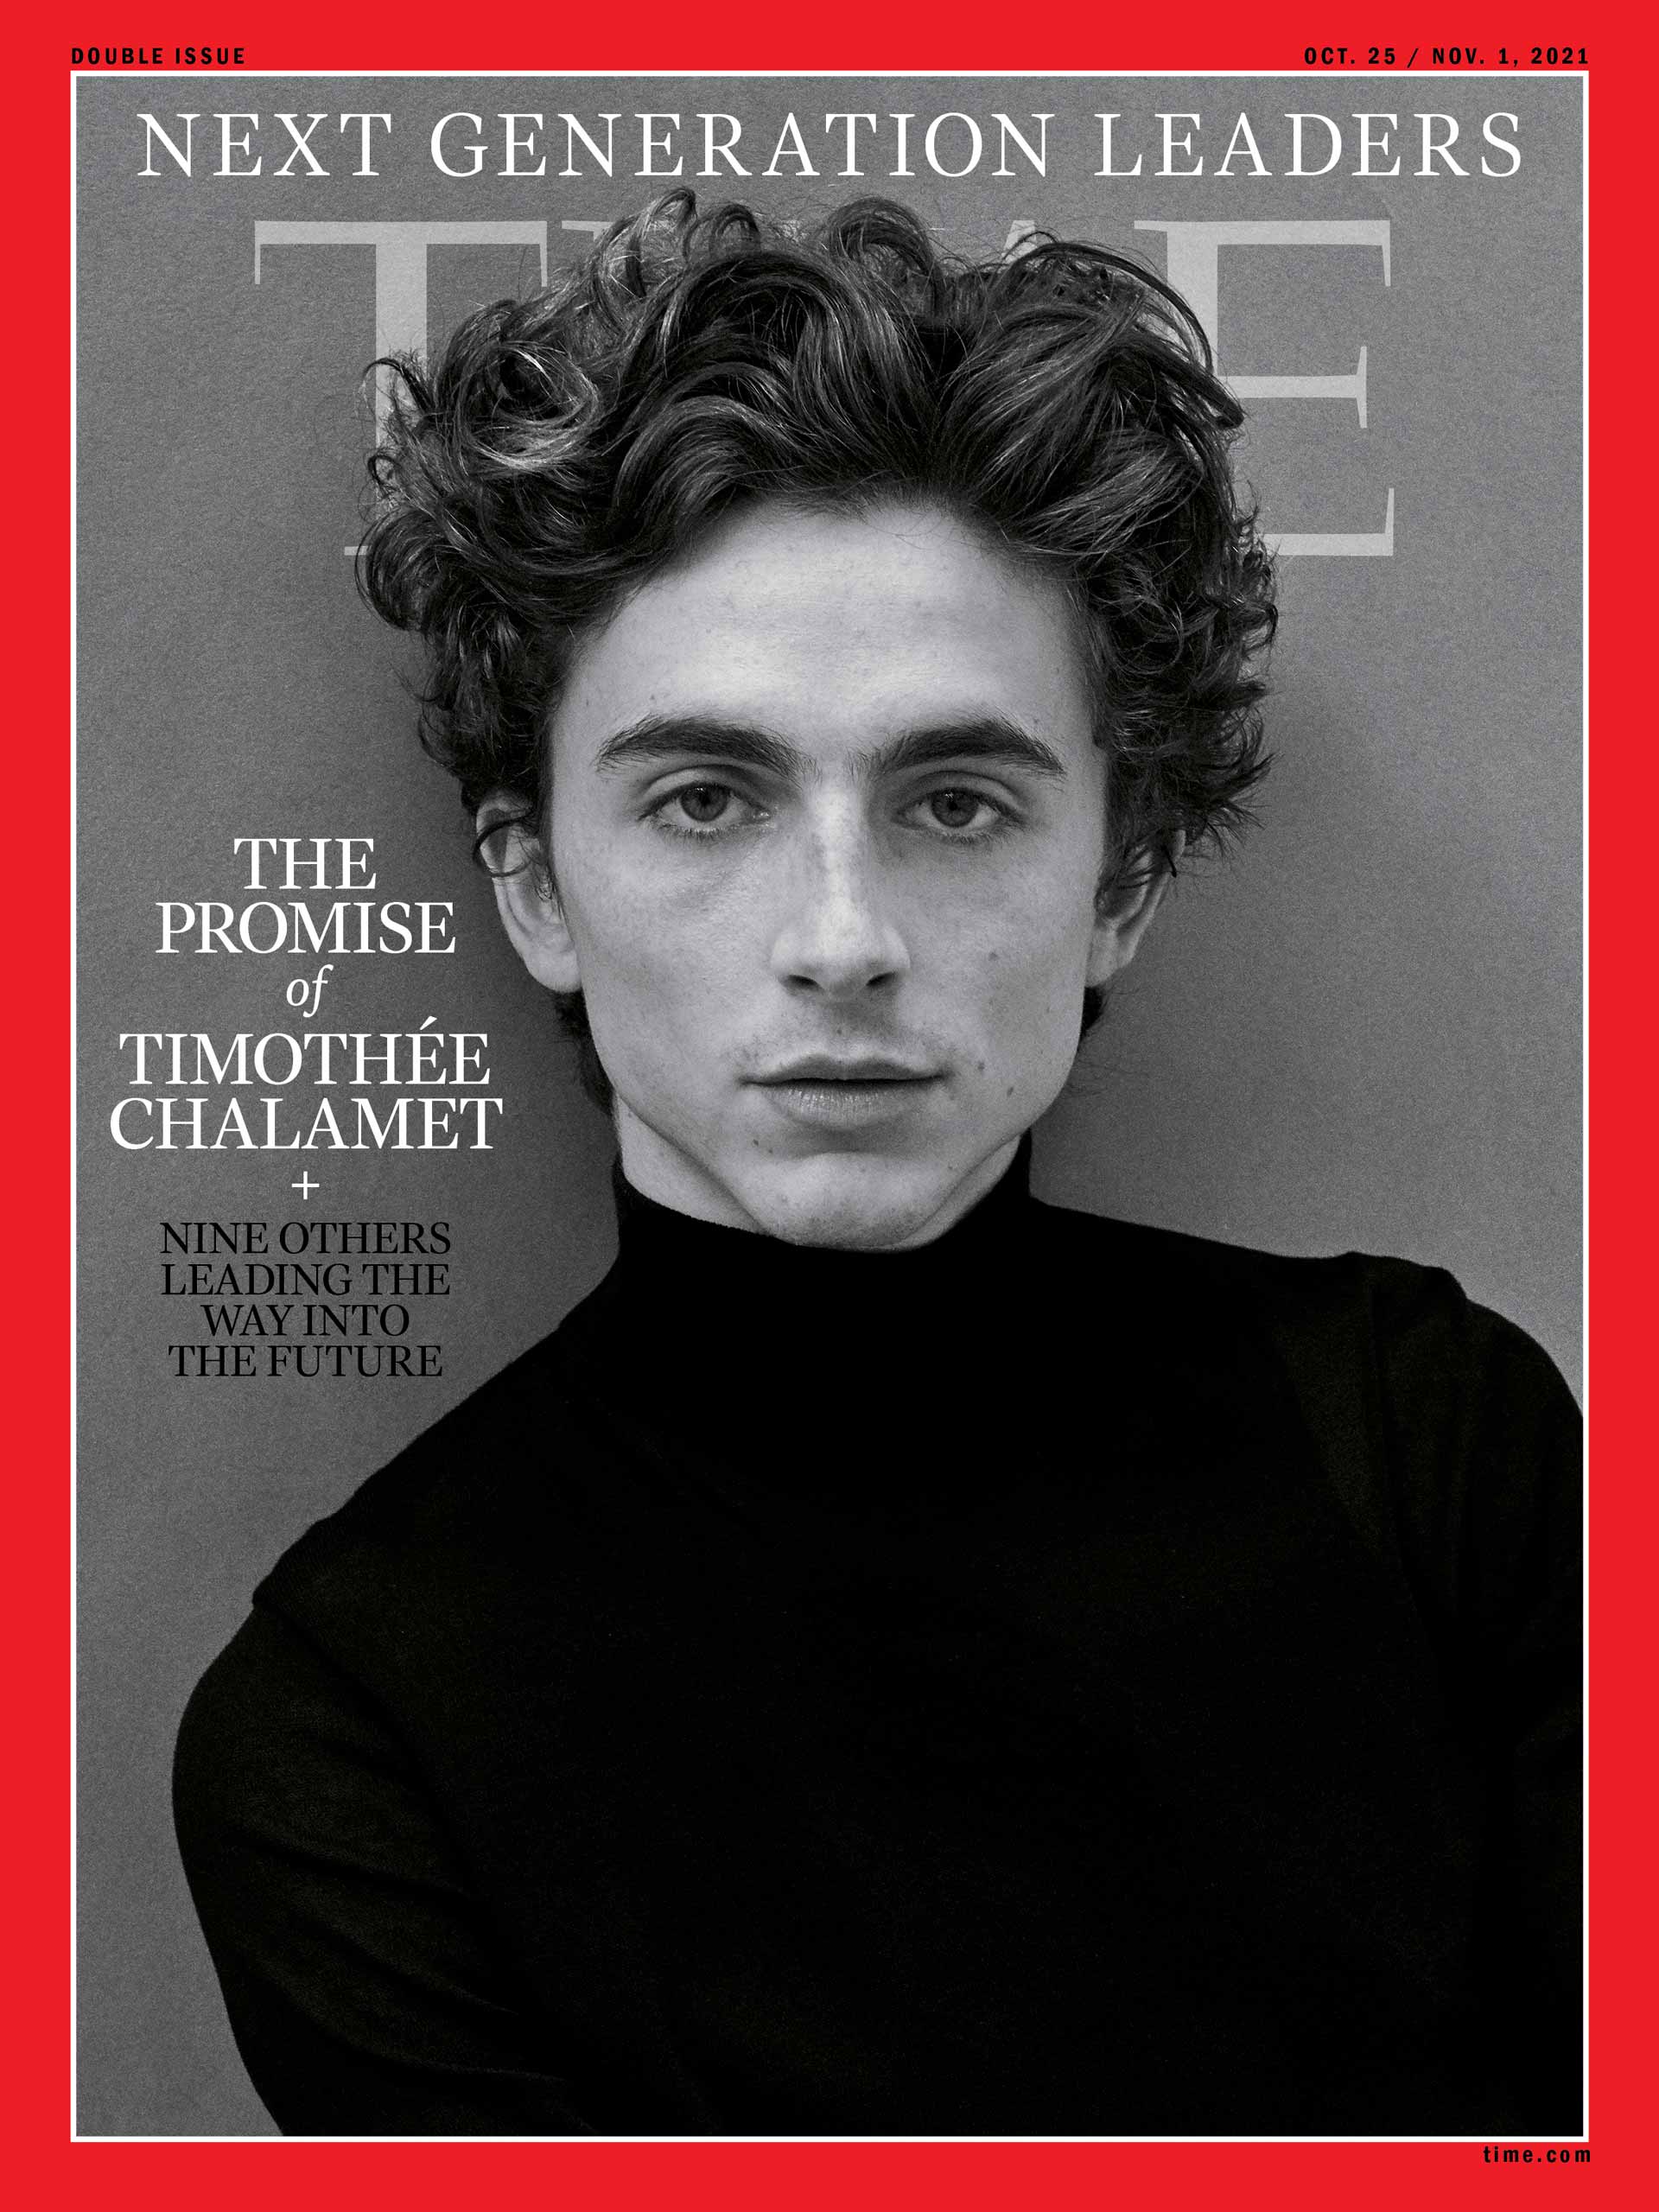 Timothée Chalamet featured on the cover of Time Magazine, heading their October 25, 2021 story on 'Next Generation Leaders'.